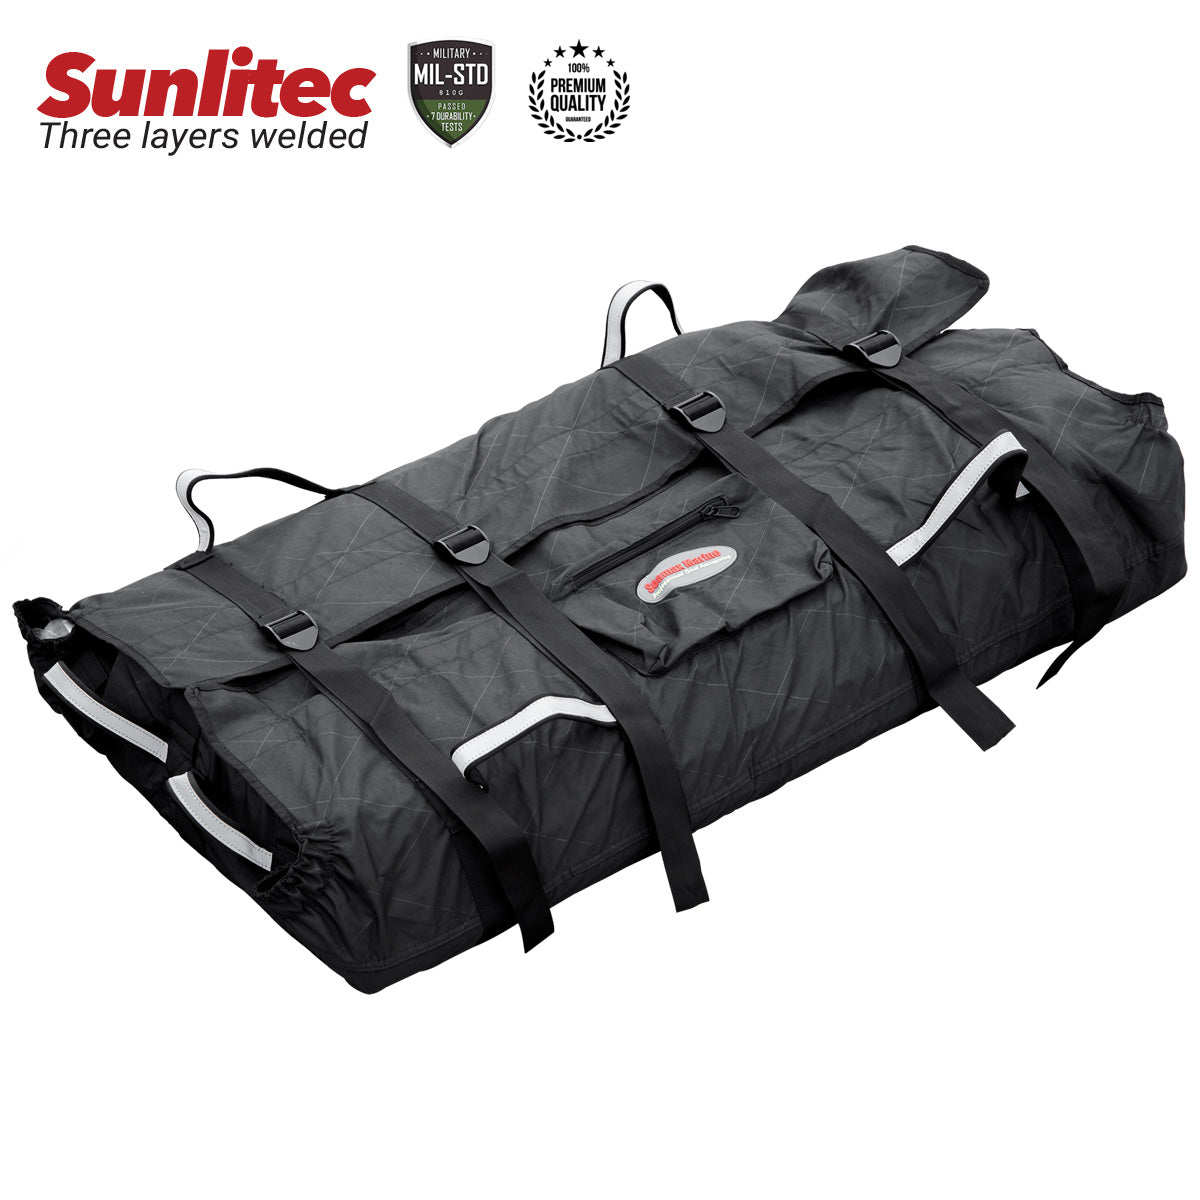 Floor Board Carrying Bag for Inflatable Boat 4 Ways Reflective